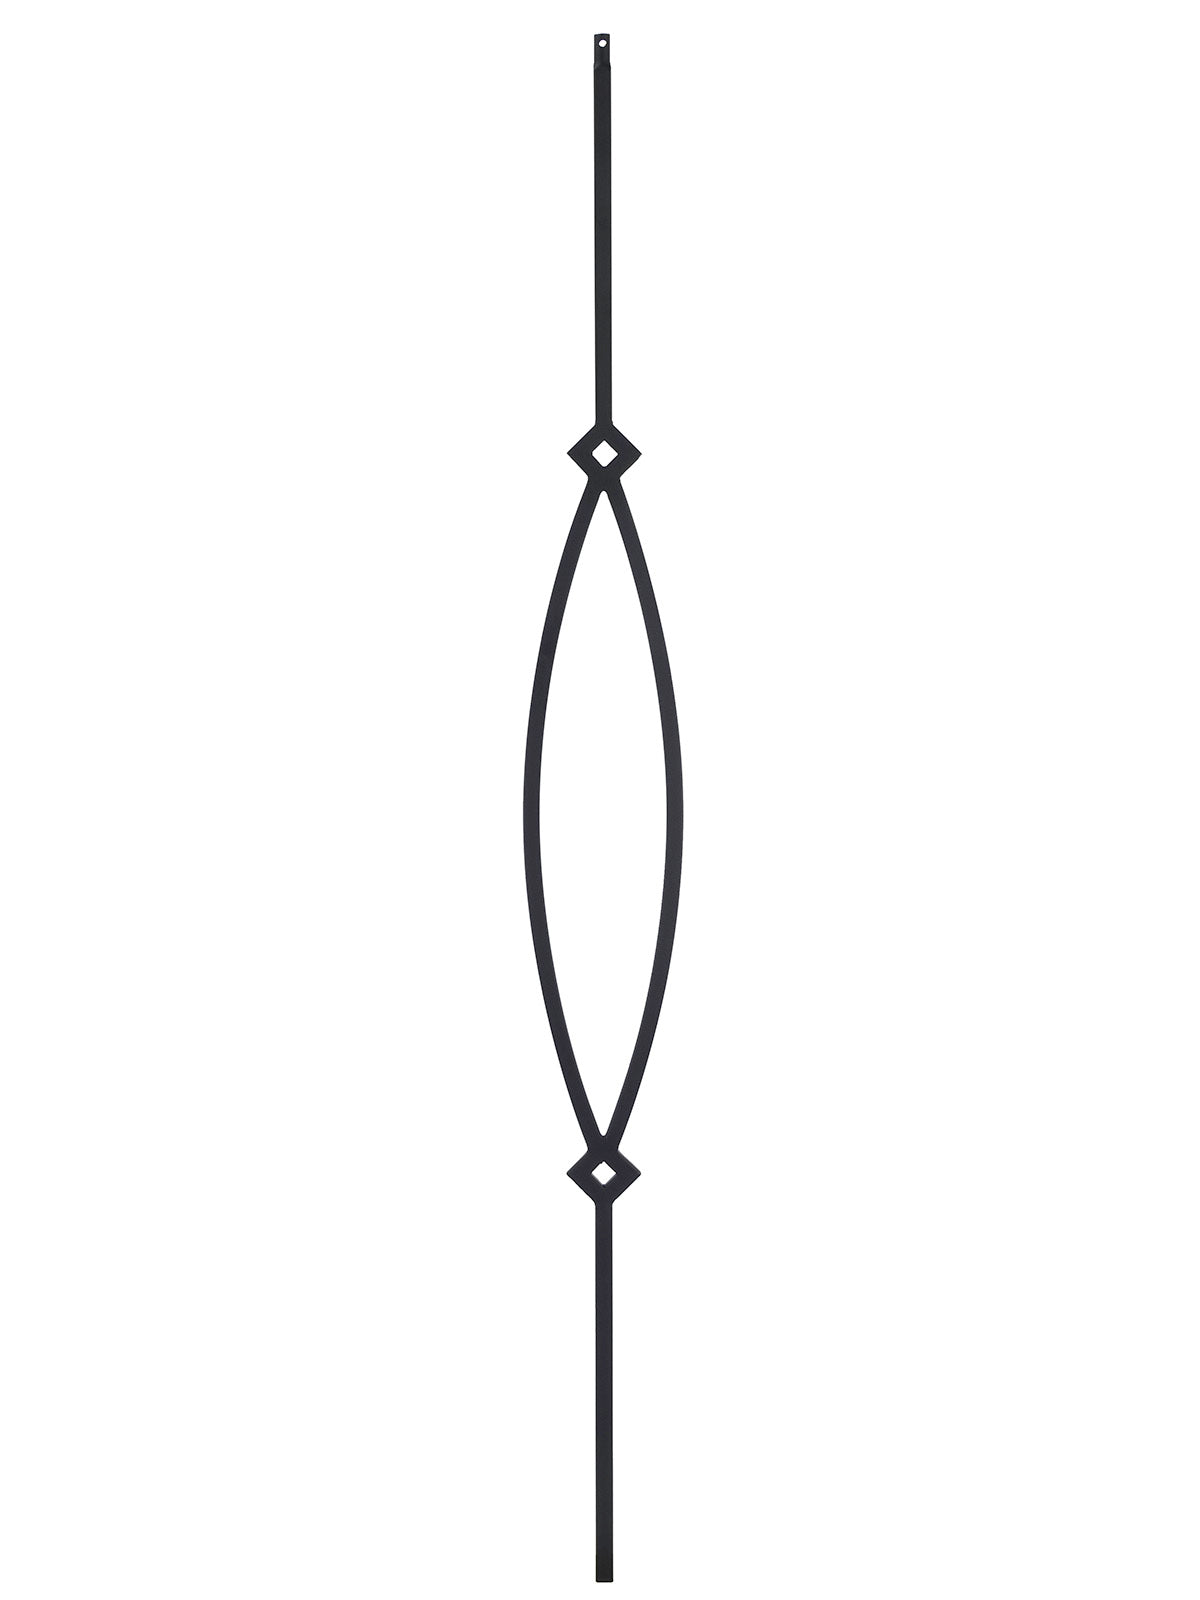 Iron Baluster T16 - 1/2" Square (Contemporary - Pointed Oval)